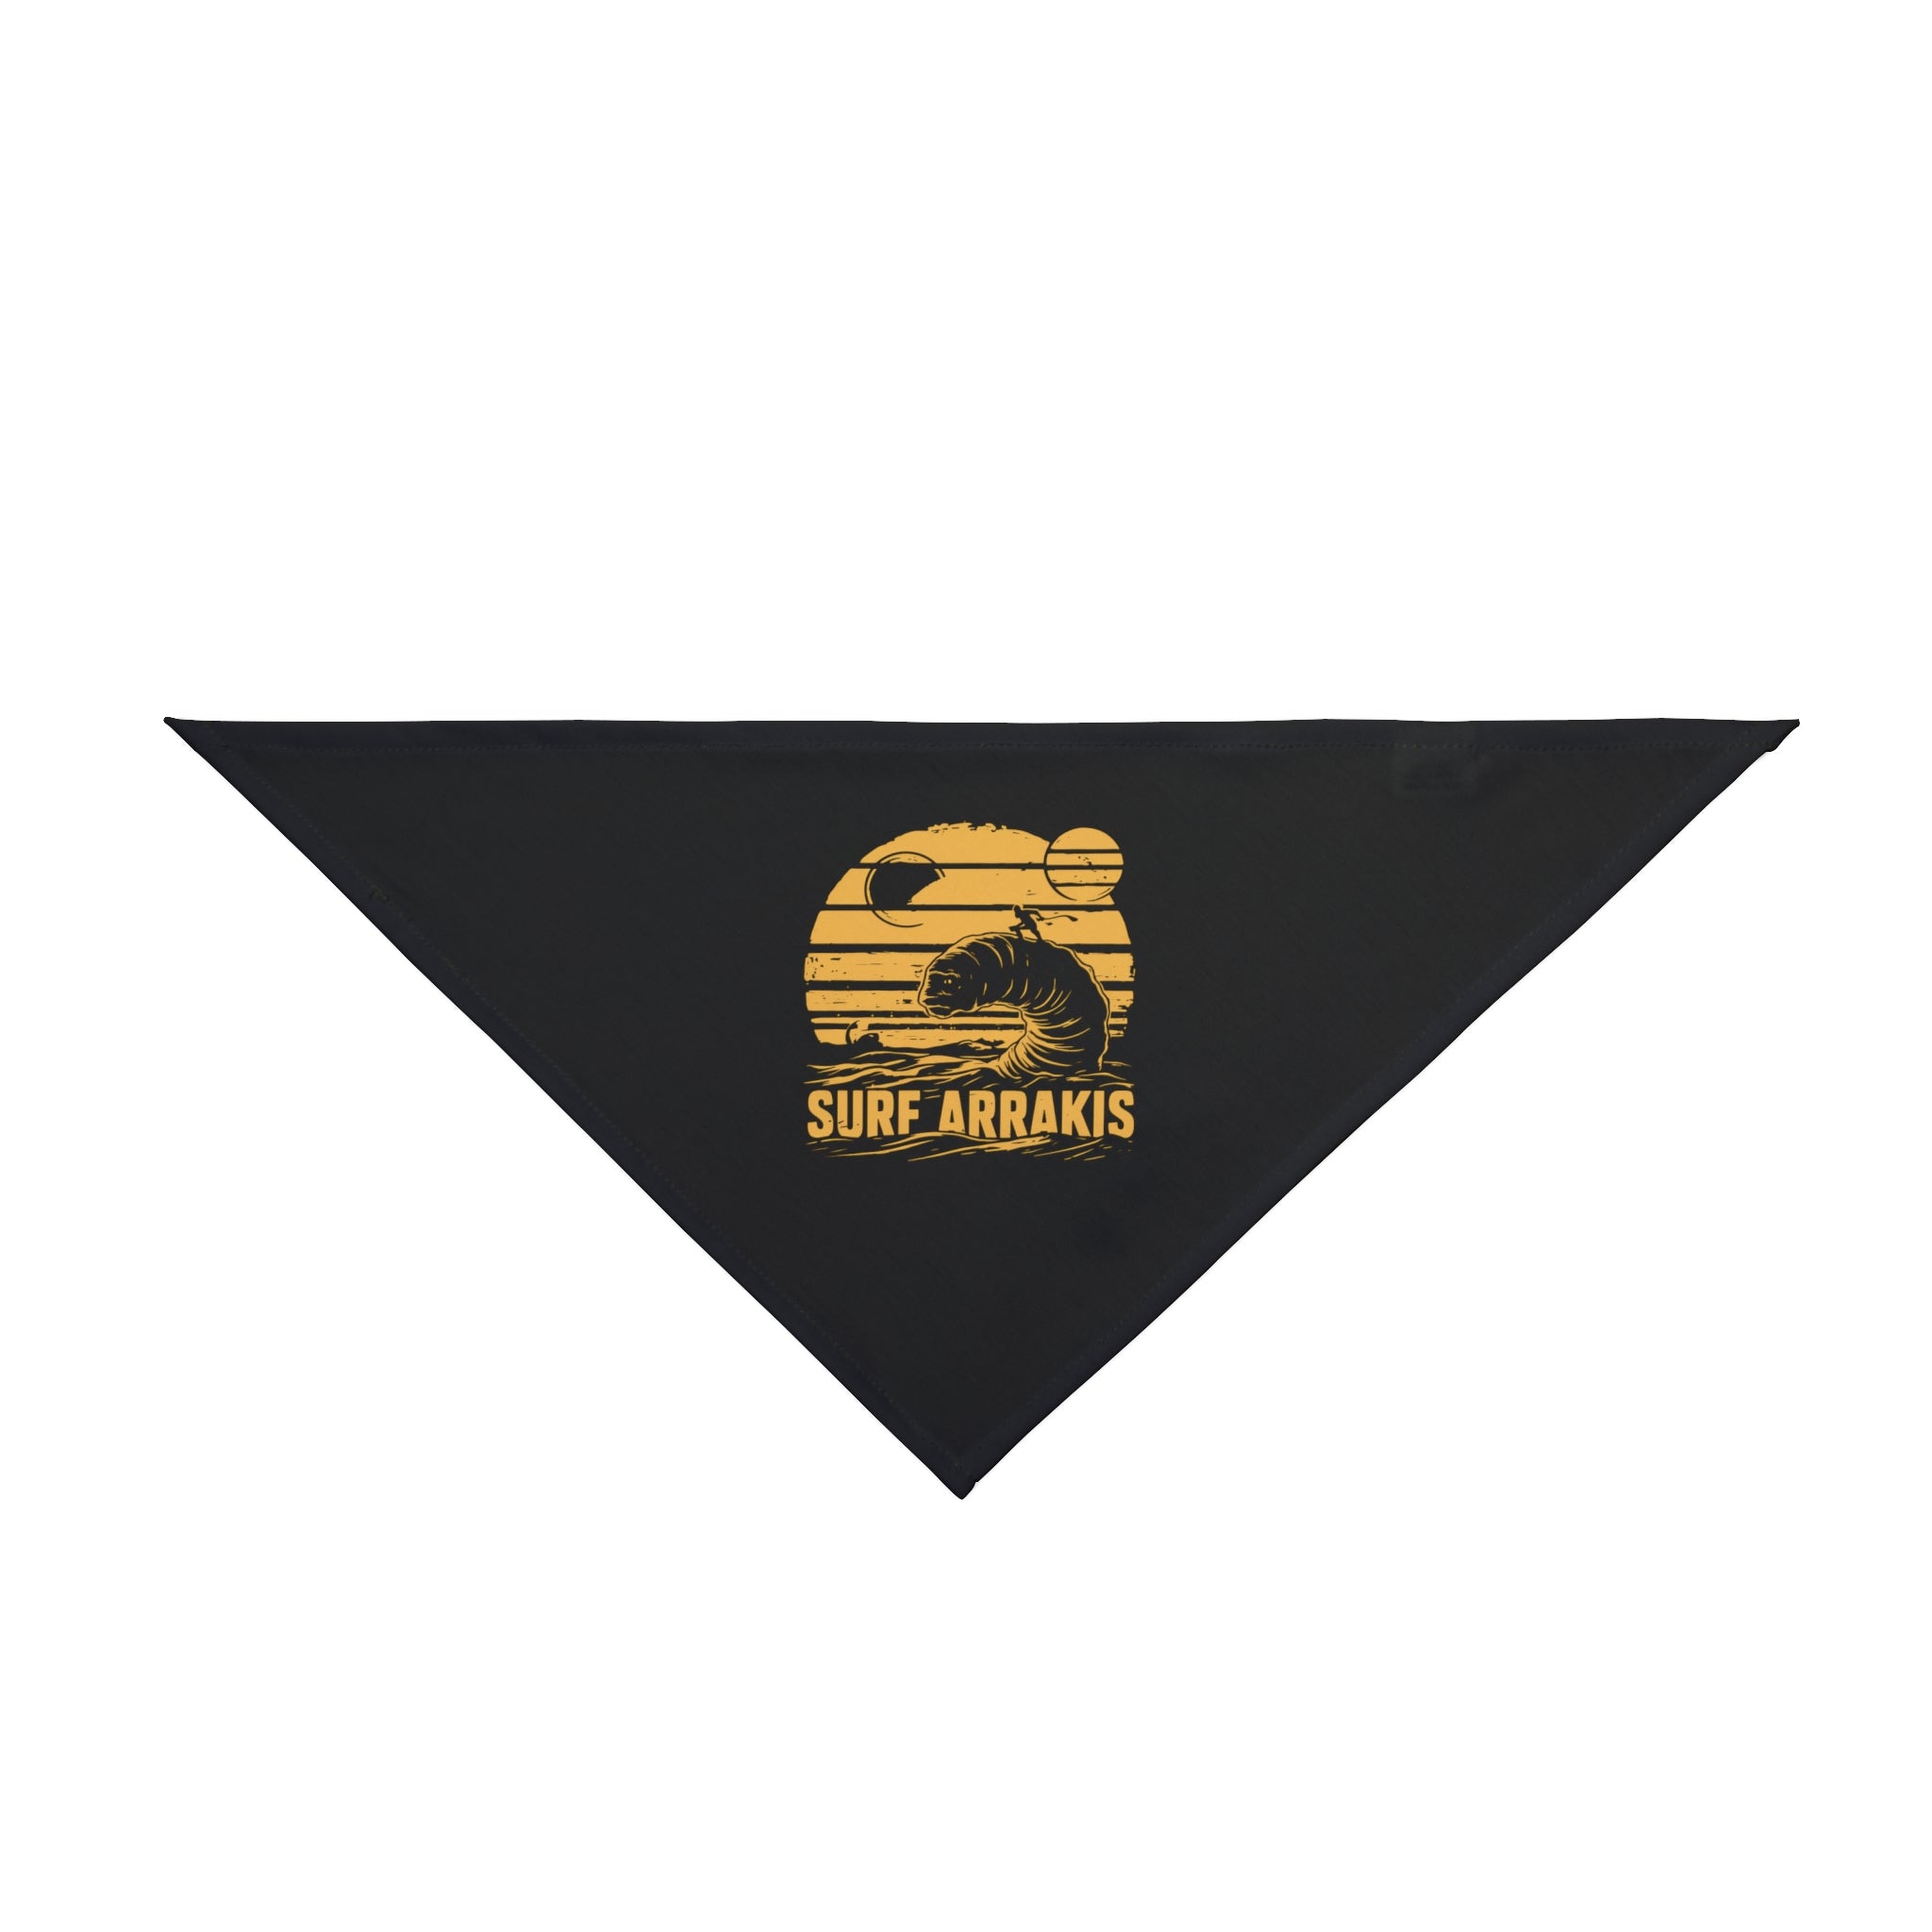 Surf Arrakis - Pet Bandana with a yellow design featuring a sandworm under a sun and crescent moon, made from comfy polyester.